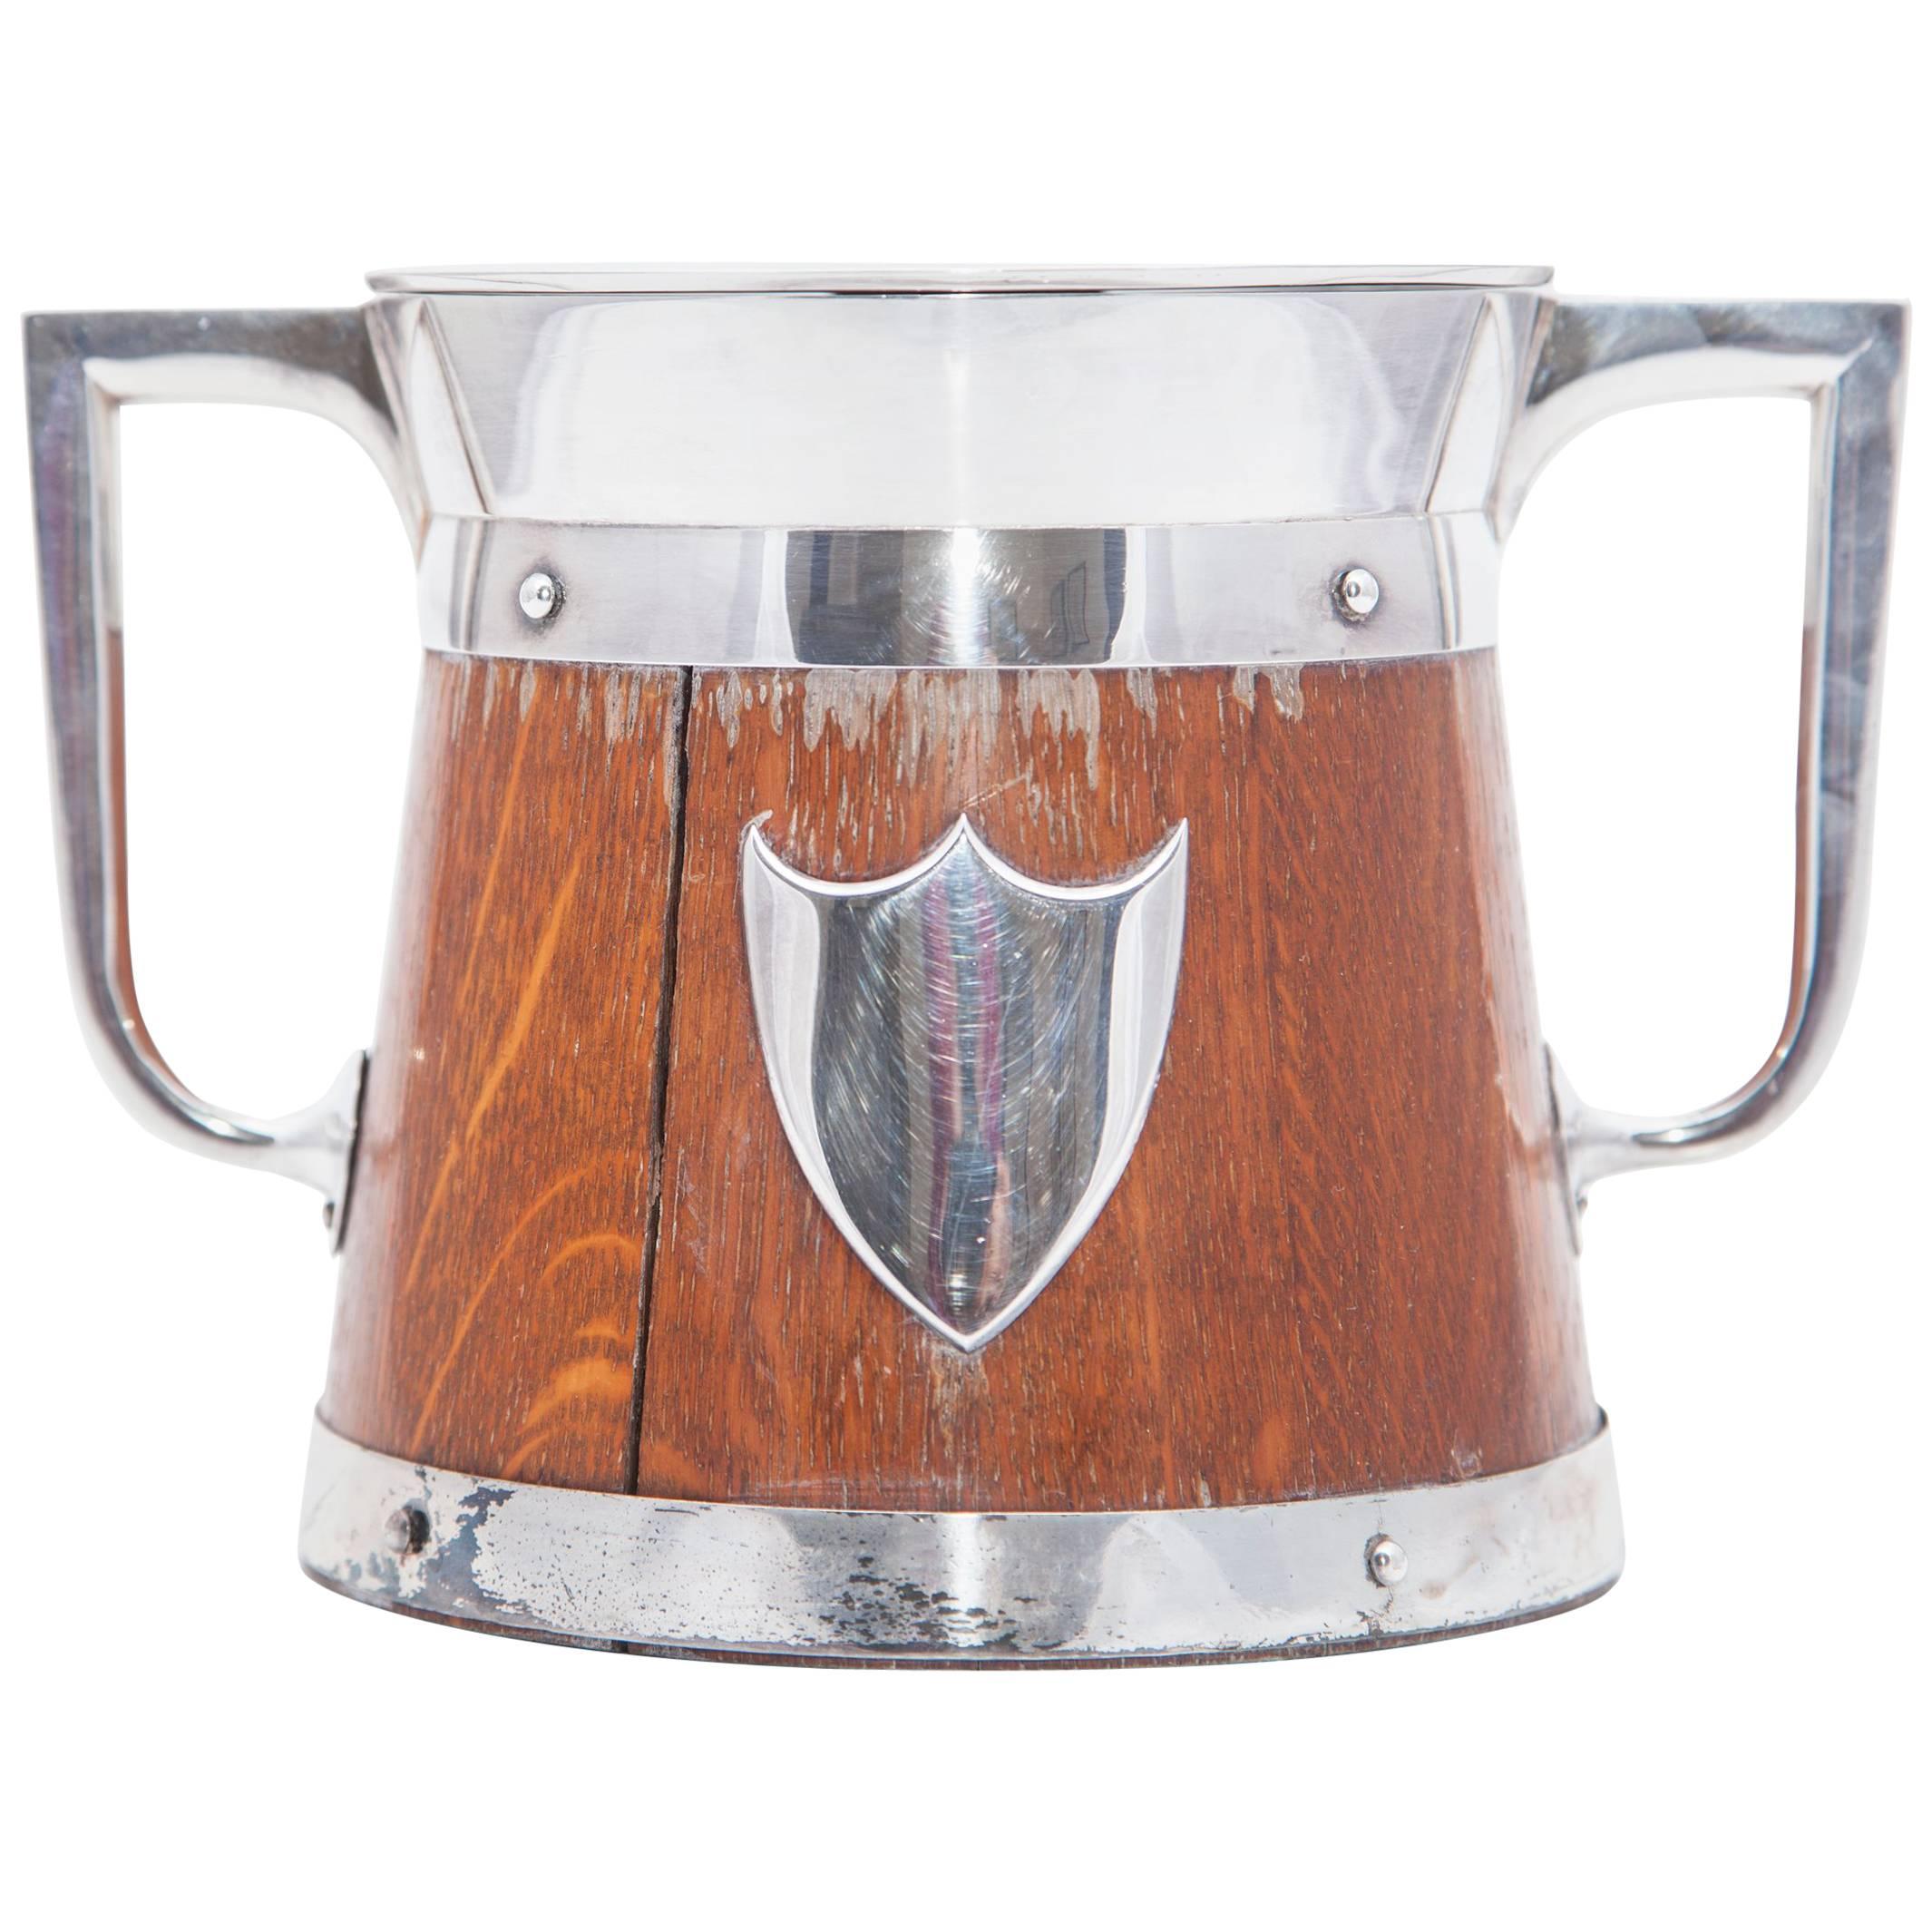  19th Century Treen Ice Bucket with Crest Embellishment and Liner For Sale